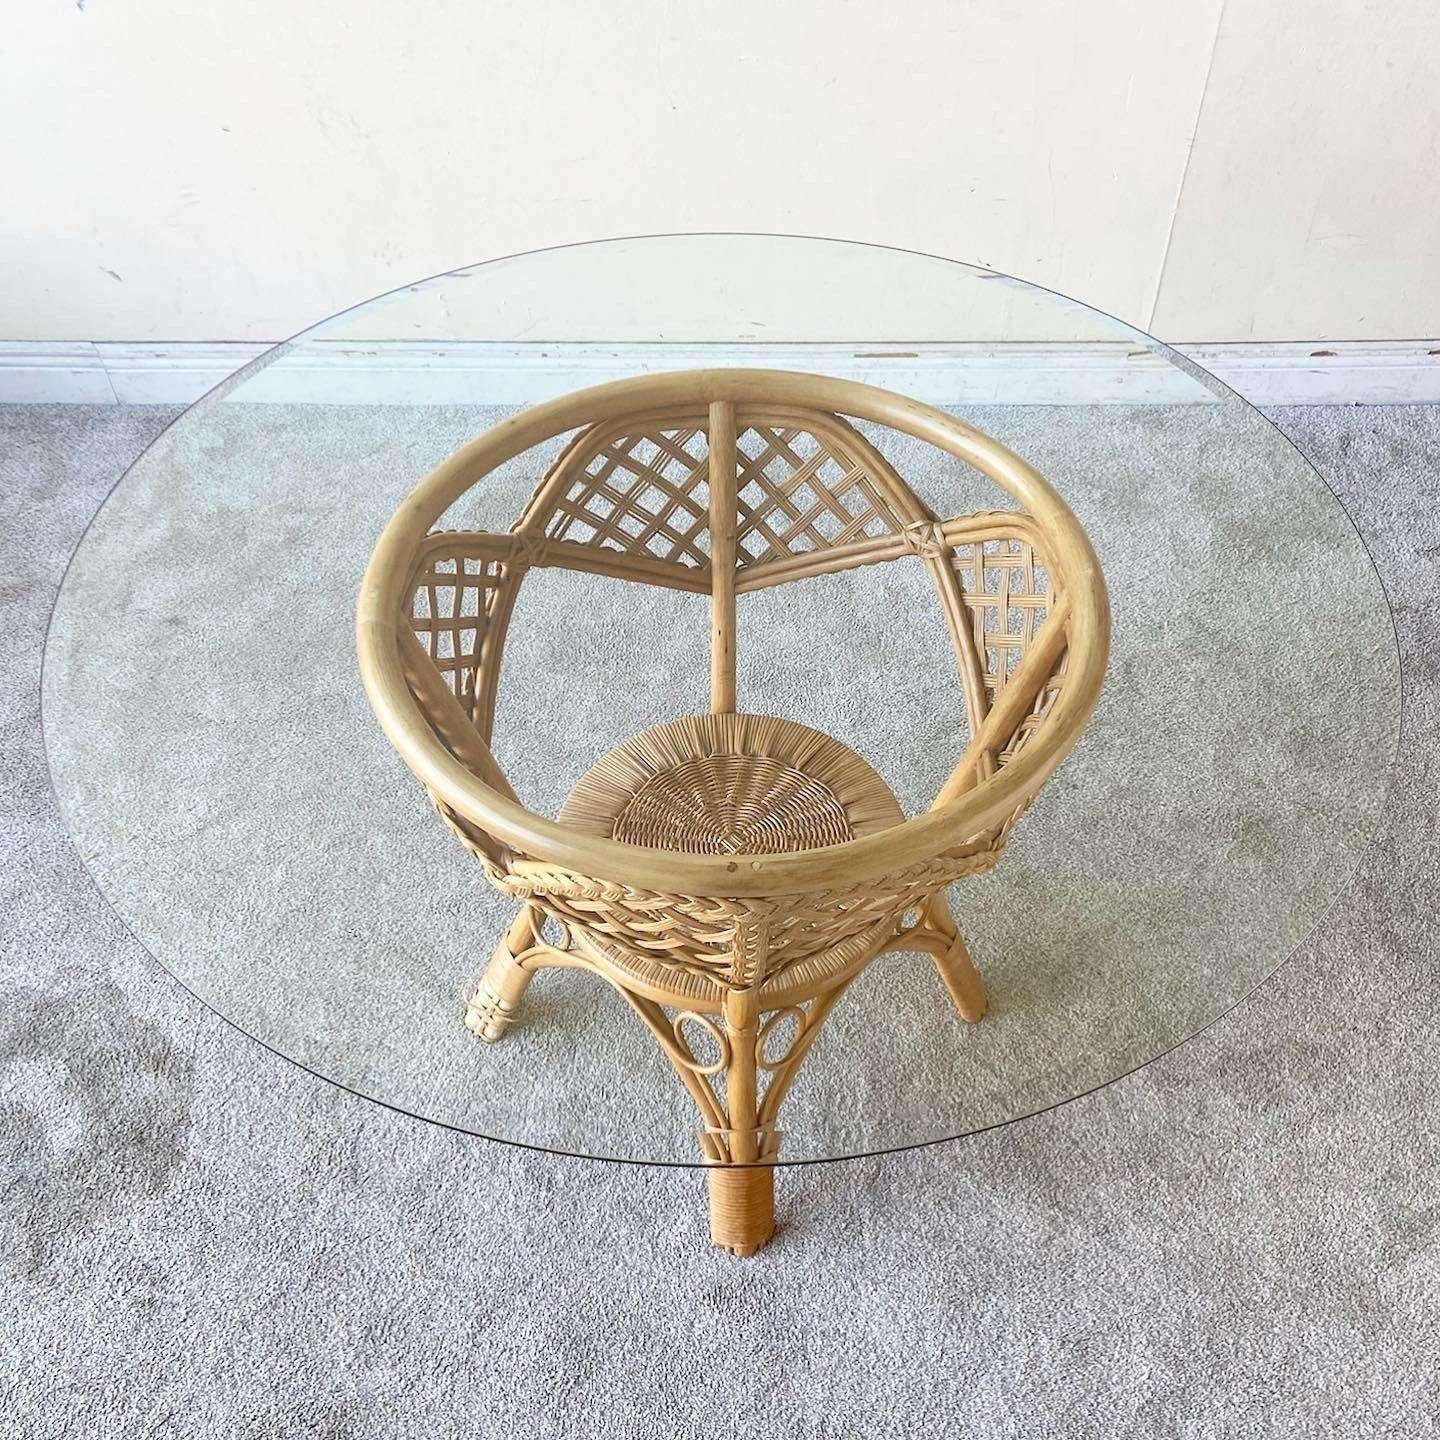 1980s Boho Chic Rattan and Woven Wicker Circular Glass Top Dining Table In Good Condition For Sale In Delray Beach, FL